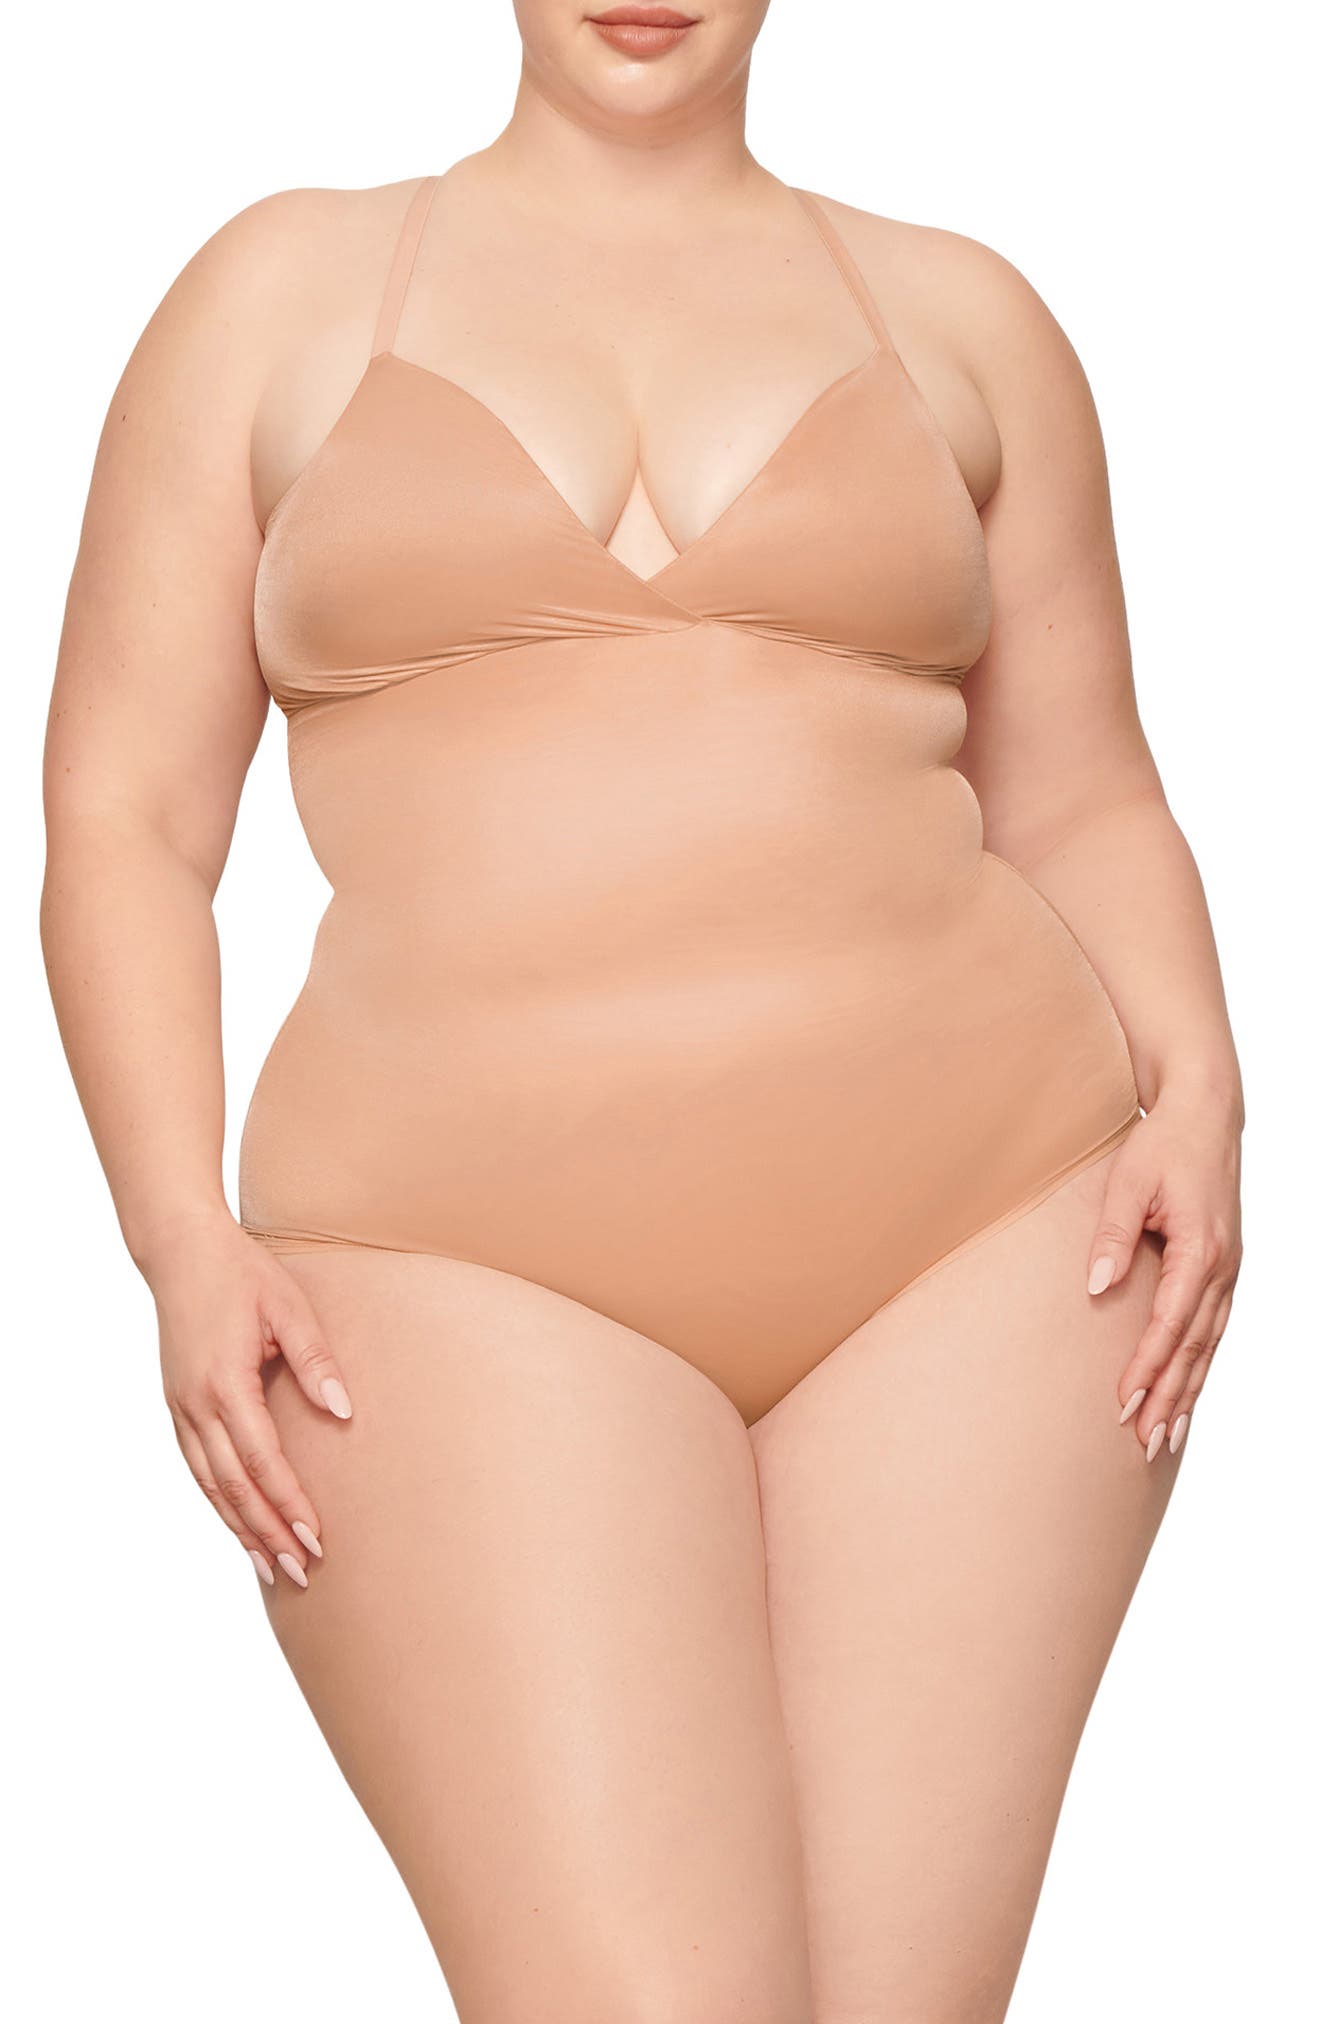 SKIMS Barely There Shapewear Briefs Bodysuit in Clay